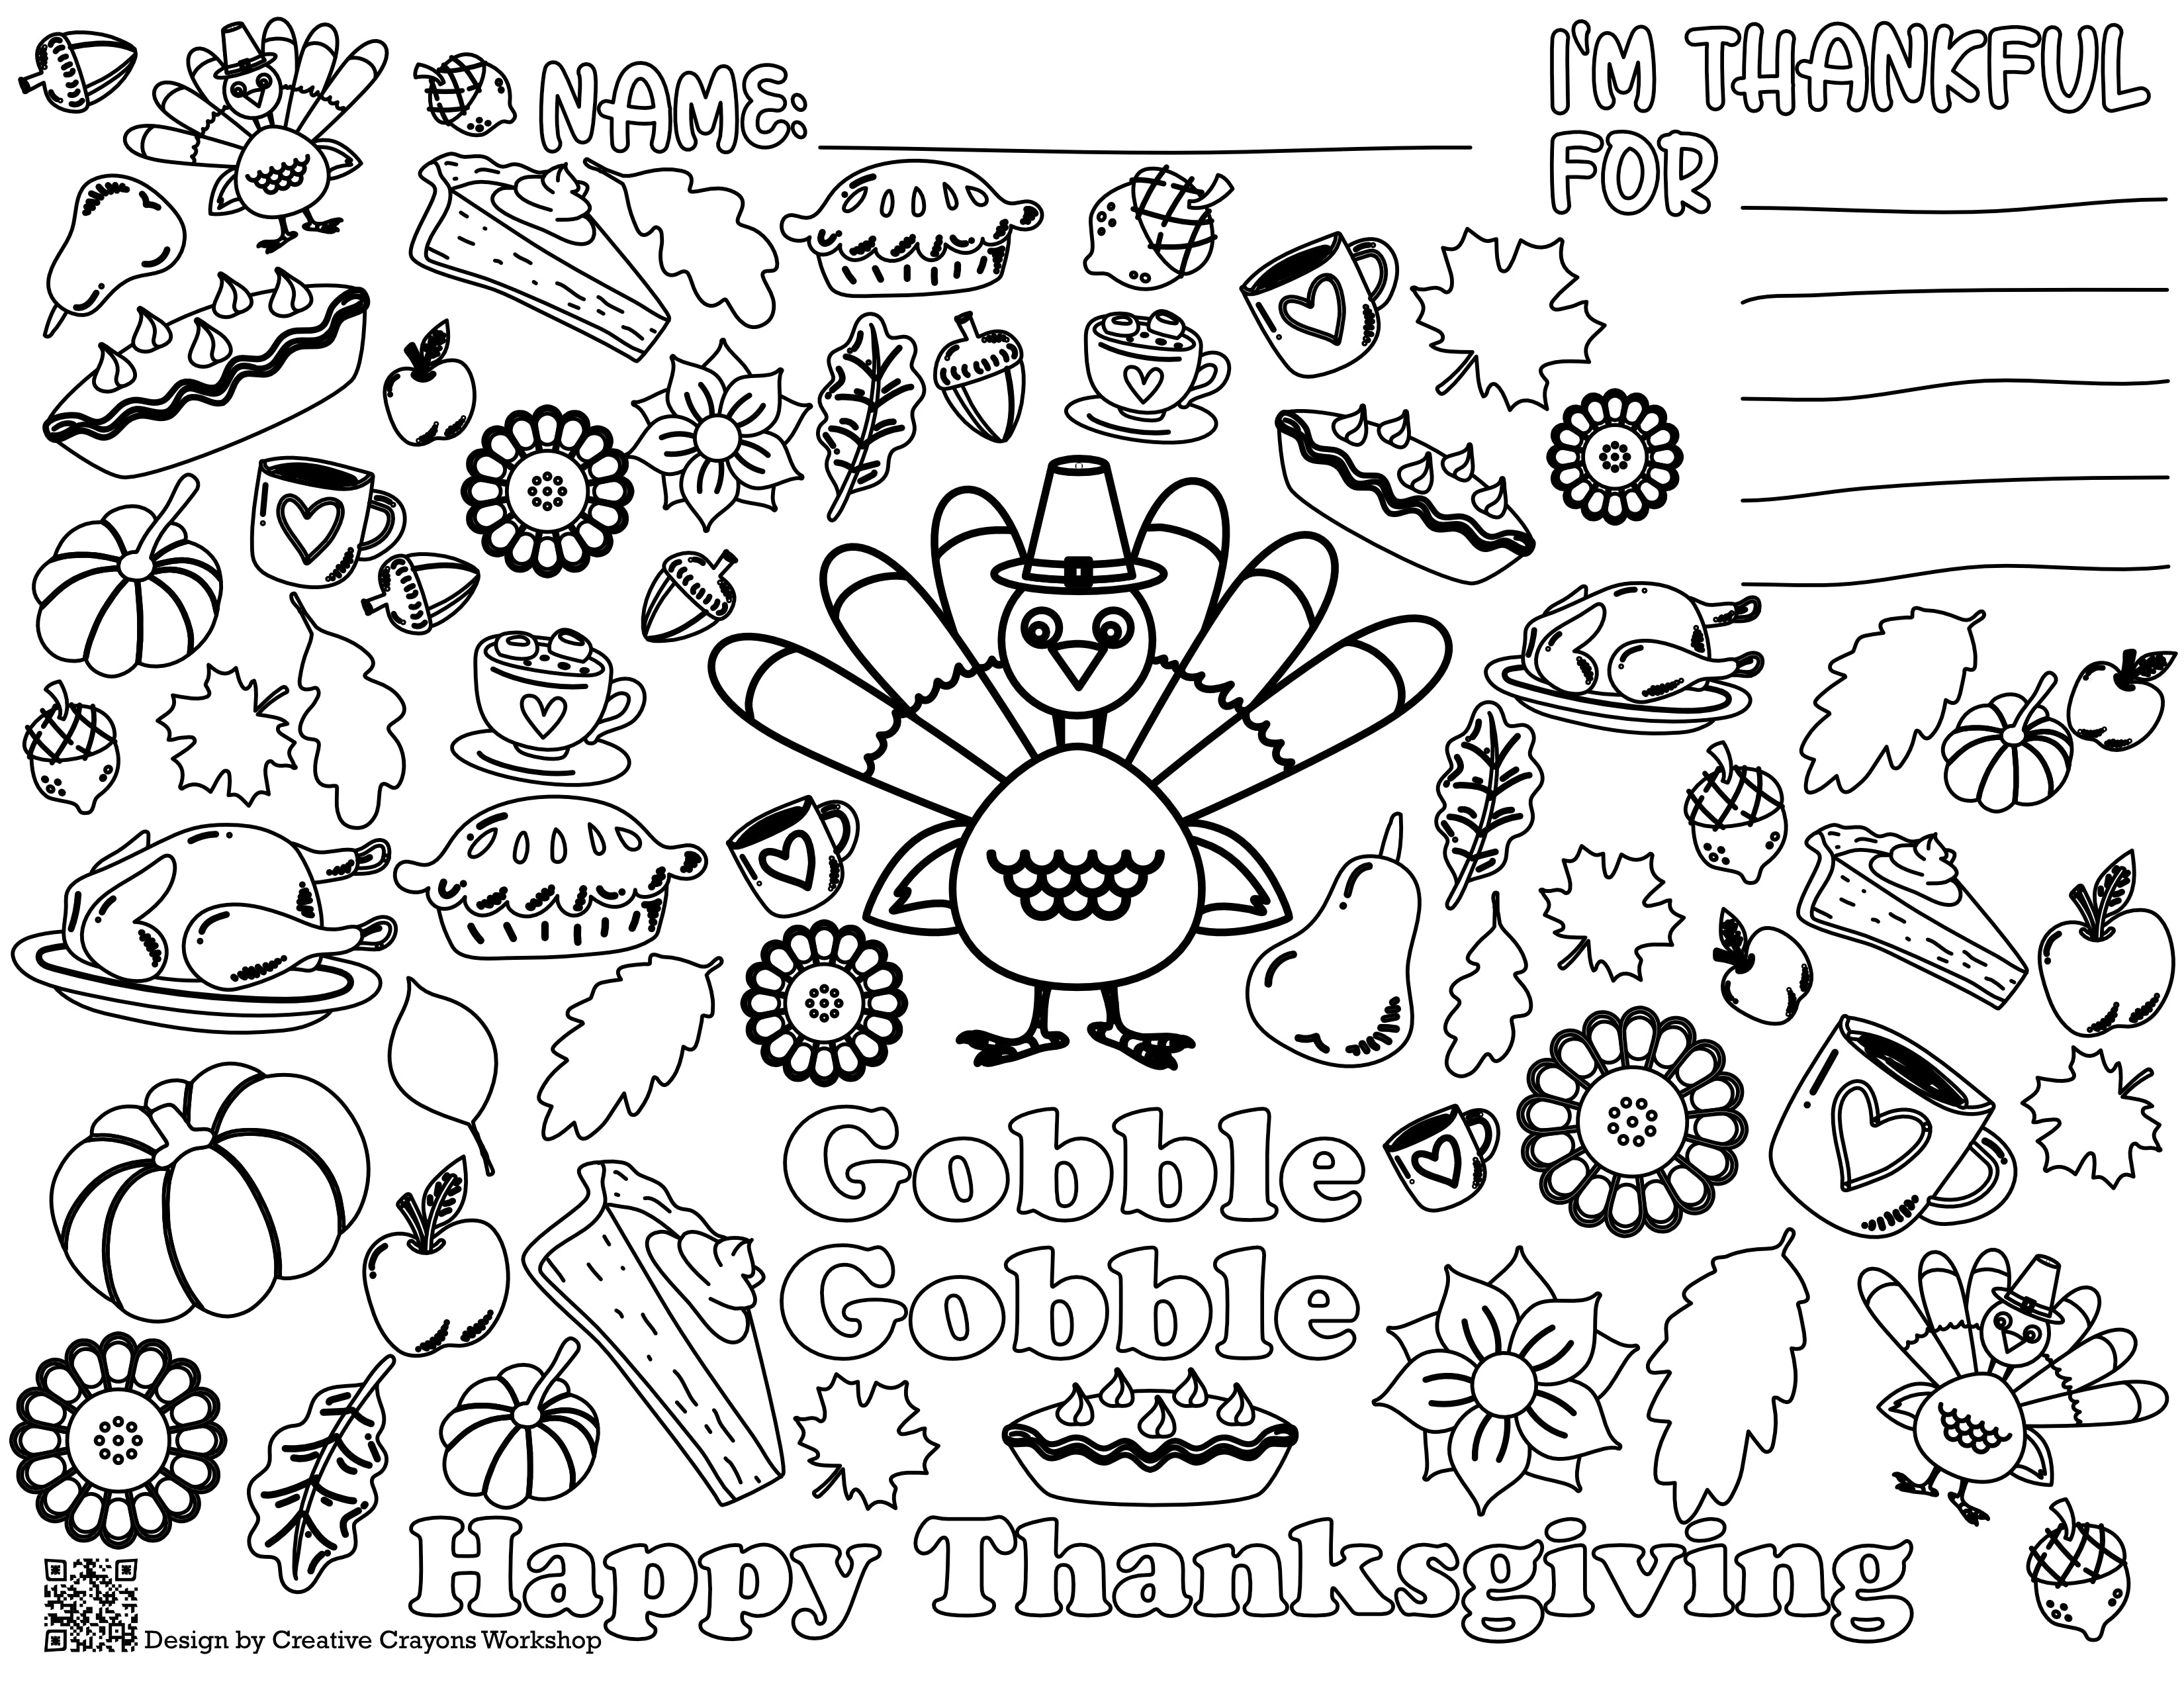 Thanksgiving coloring page â creative crayons workshop